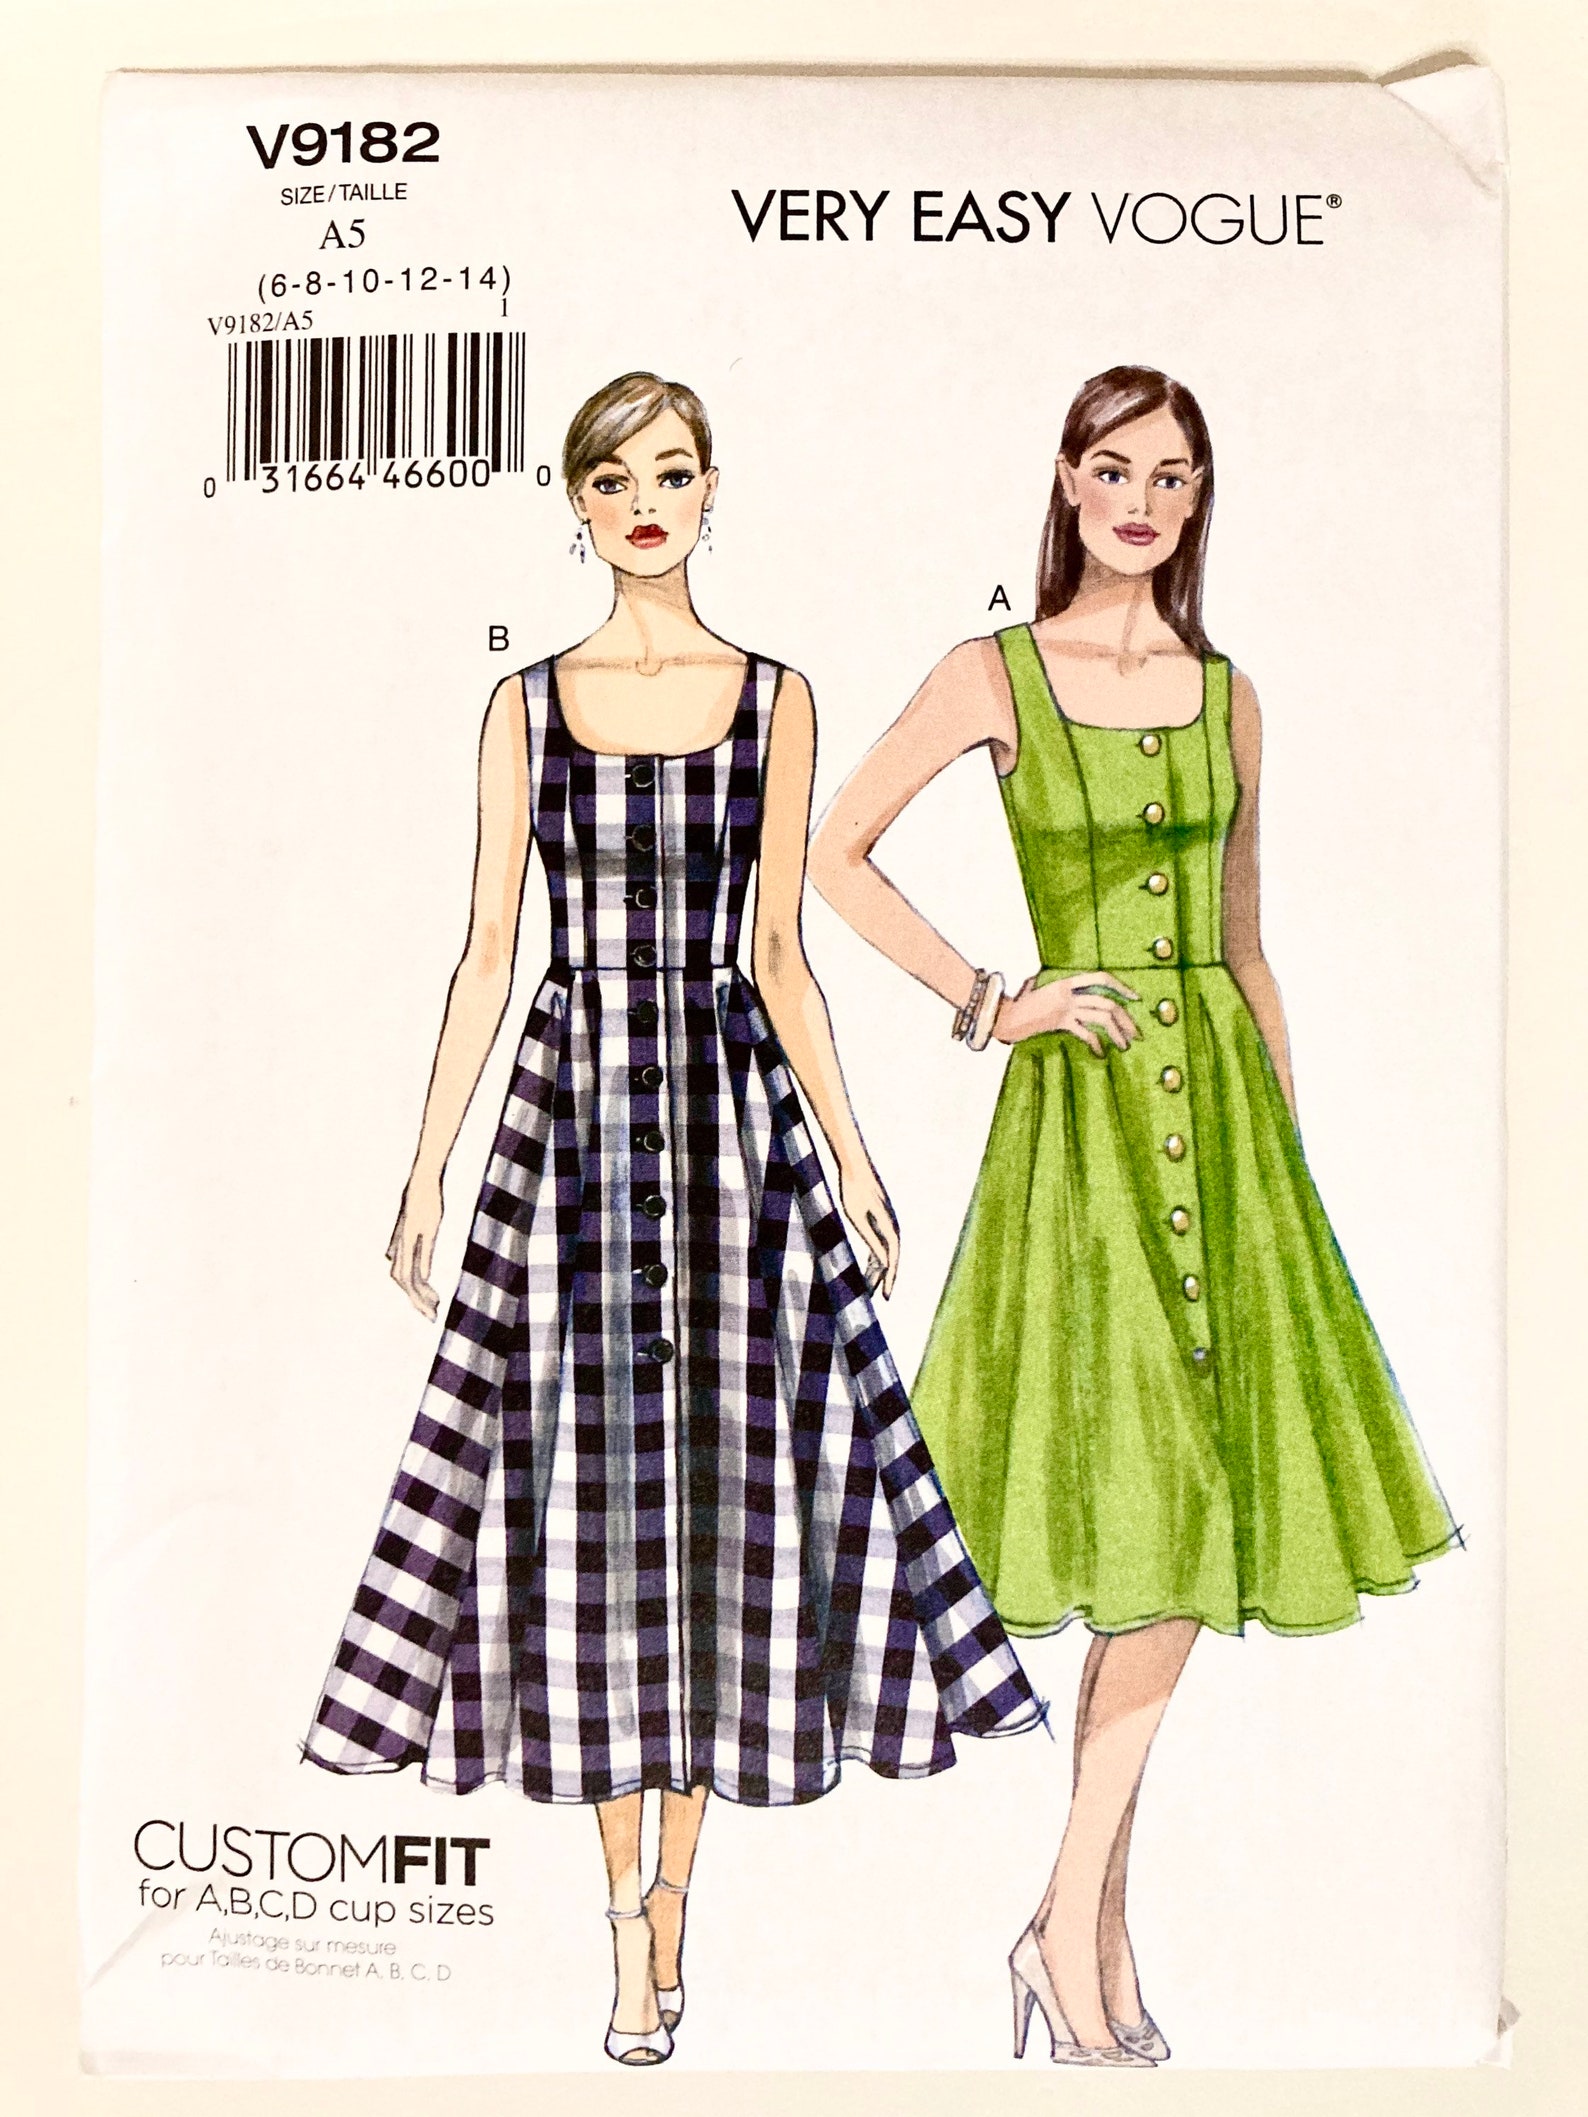 Vogue Sewing Pattern for Dress Vogue 9182 Bust 30.5 to 36 Sizes 6 to 14 ...